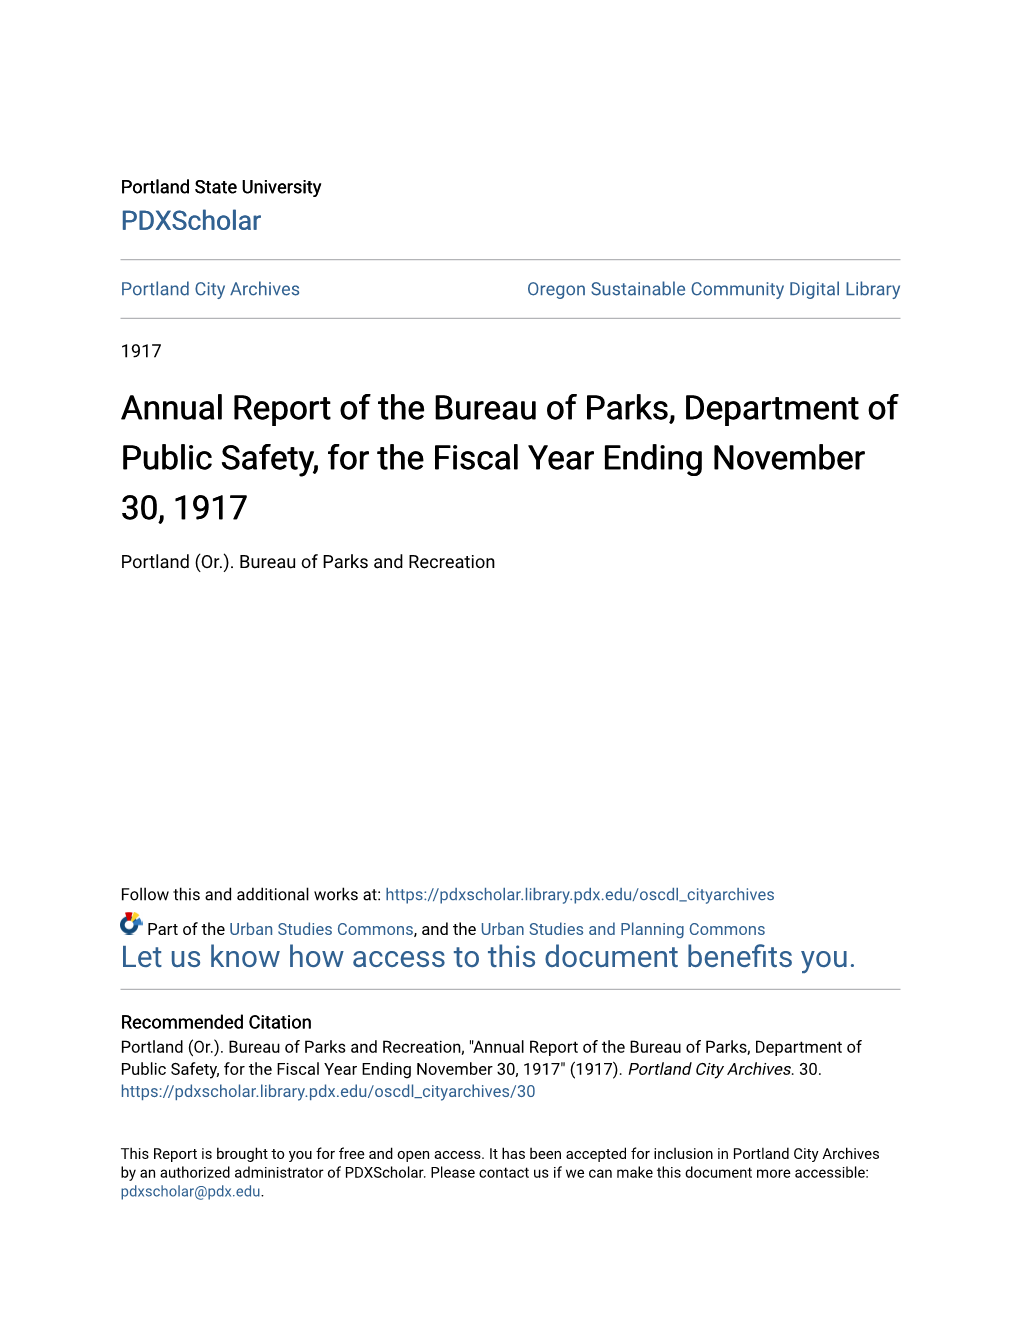 Annual Report of the Bureau of Parks, Department of Public Safety, for the Fiscal Year Ending November 30, 1917